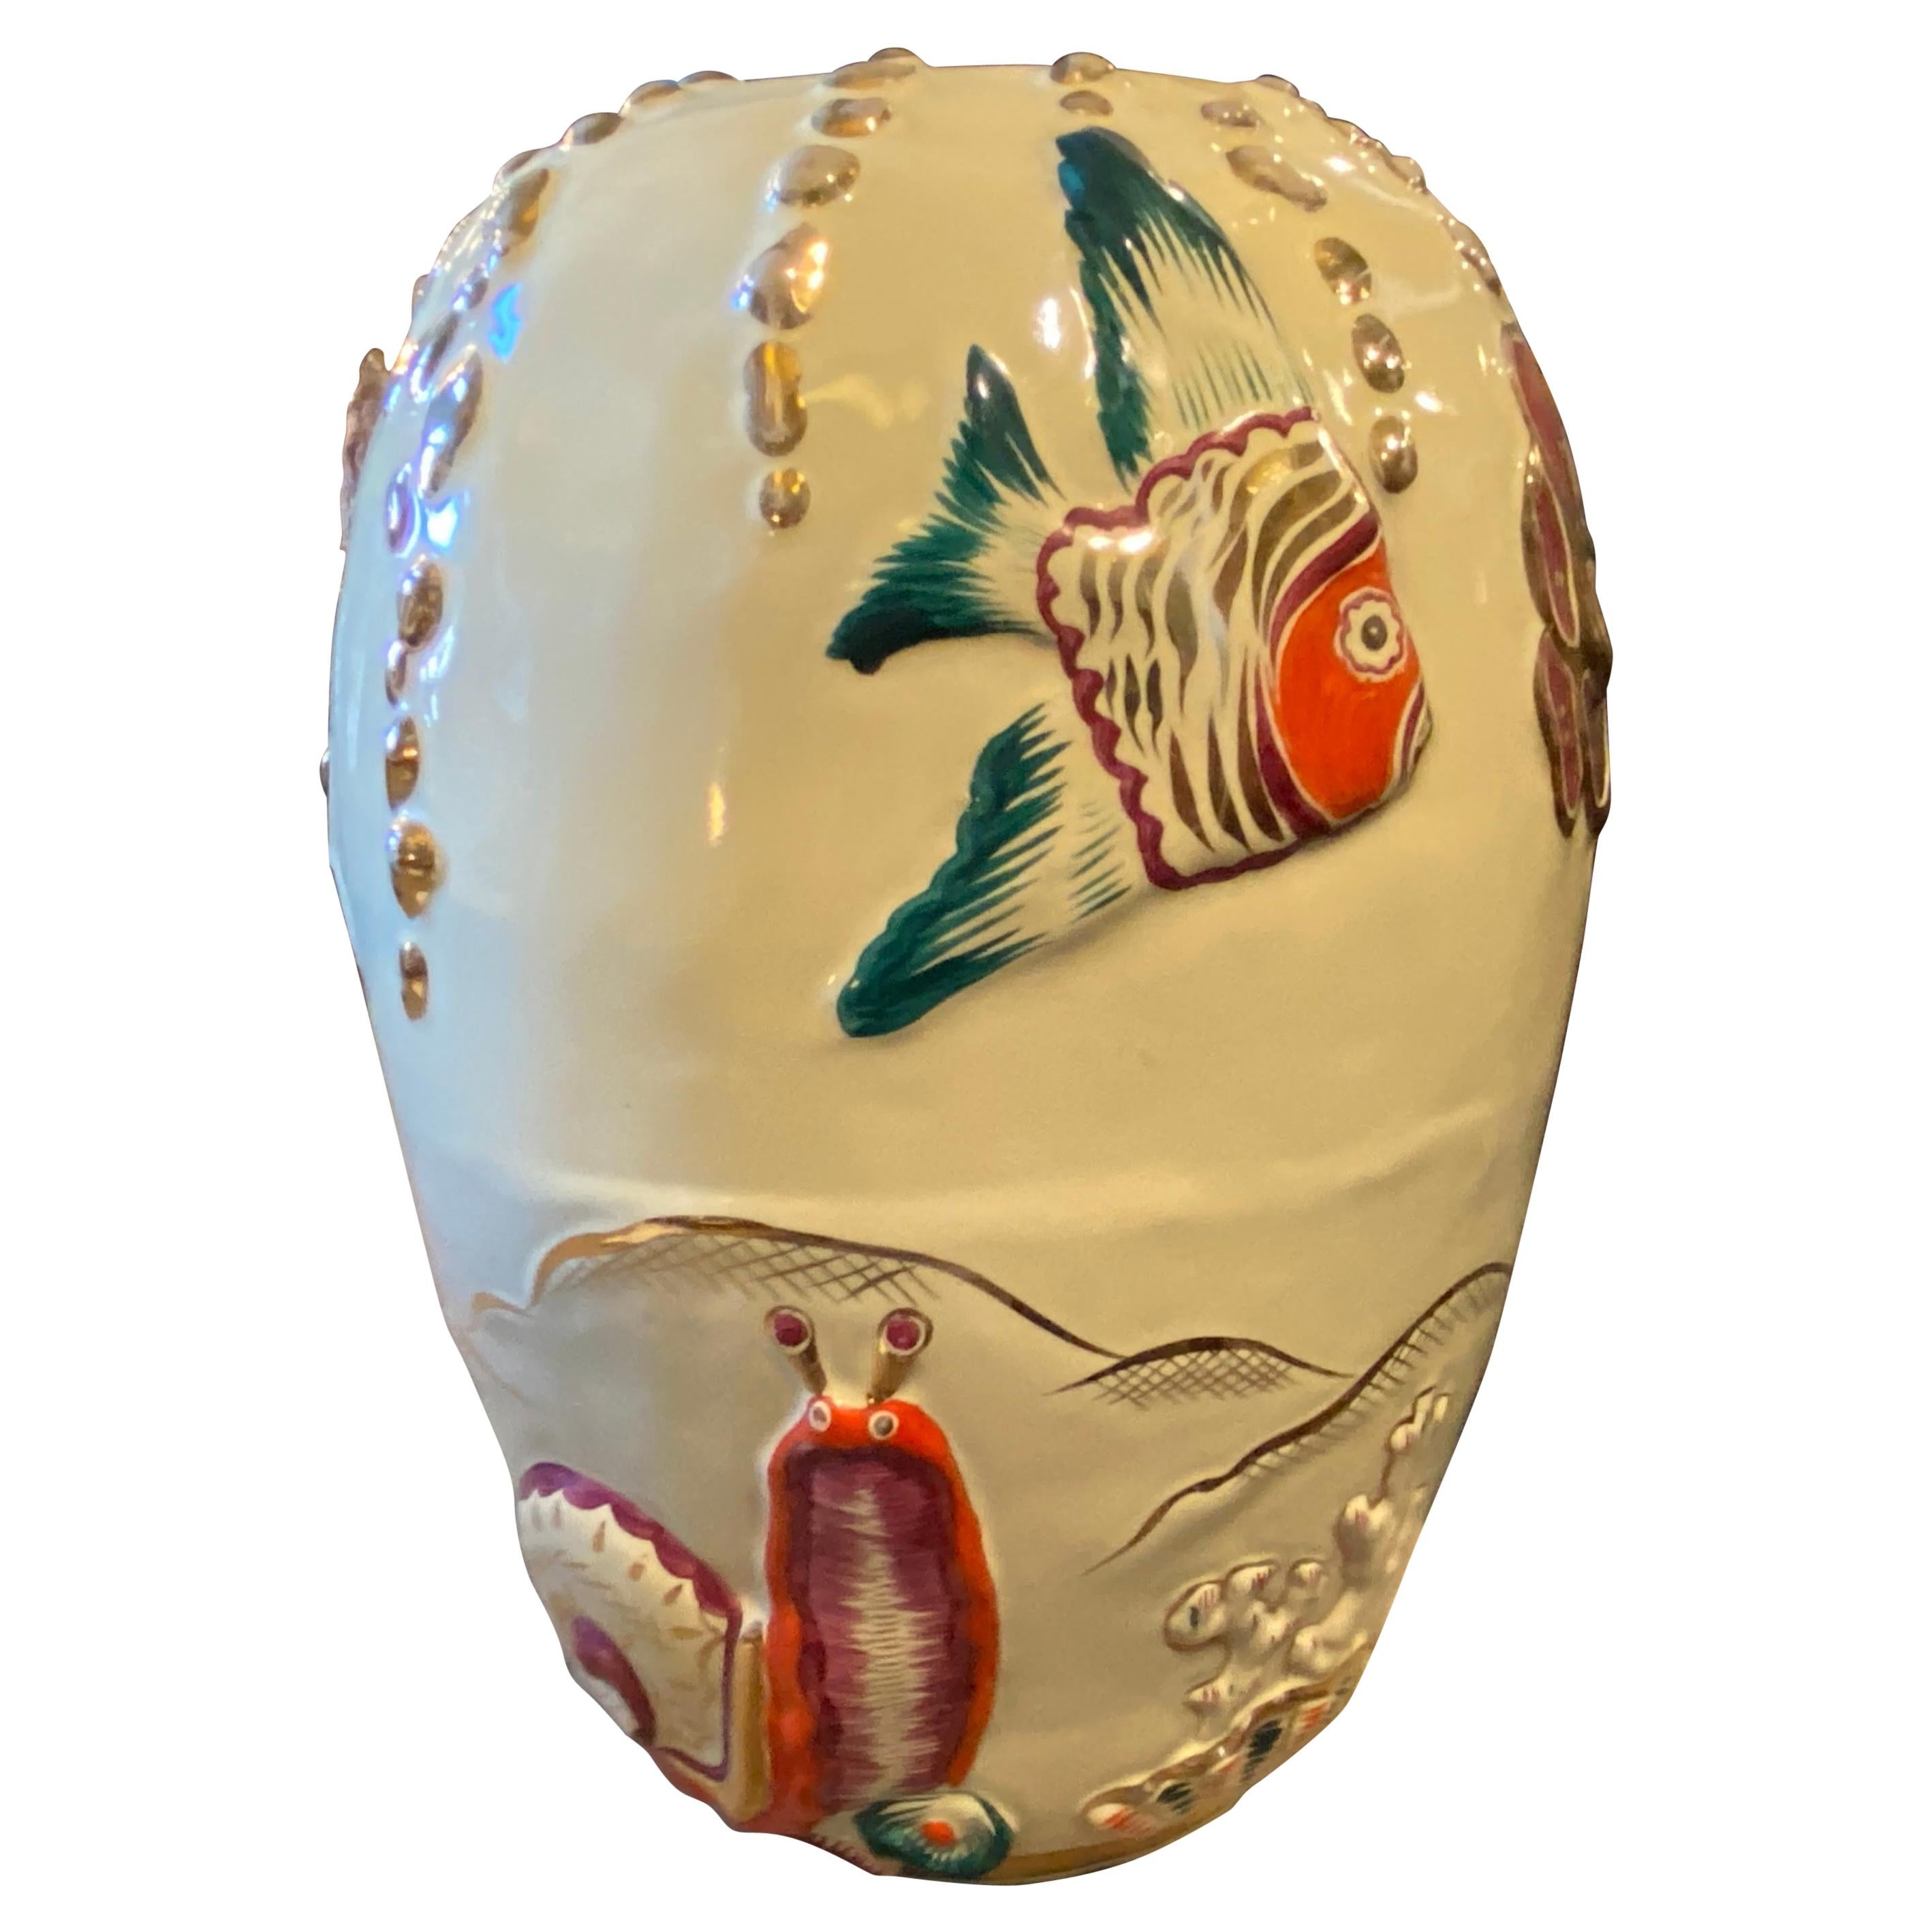 1950s Pucci Style Hand-Crafted Polycrome Ceramic Italian Vase